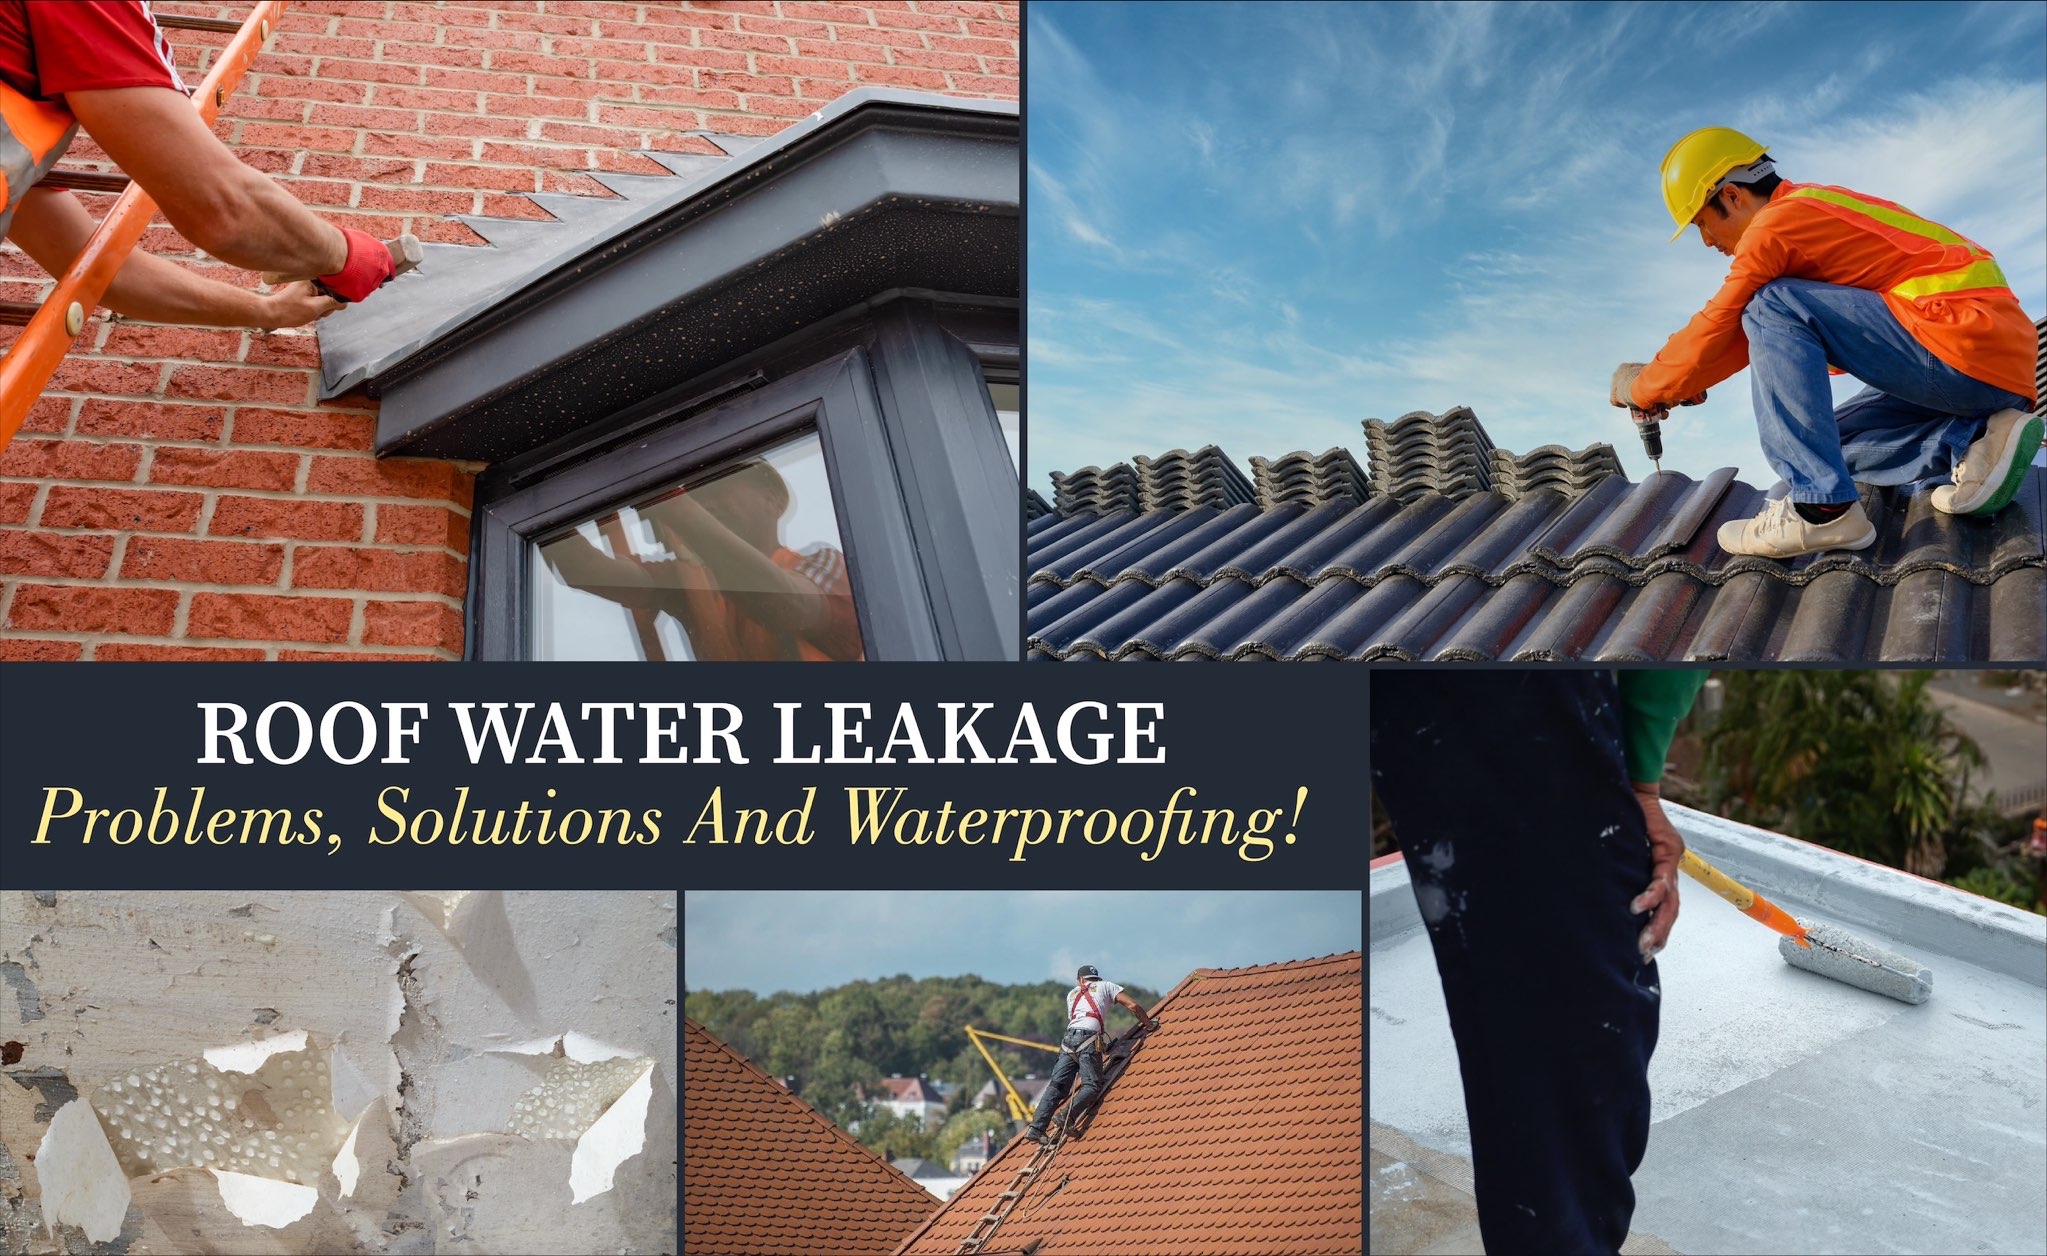 Roof Water Leakage Problems, Solutions and Waterproofing